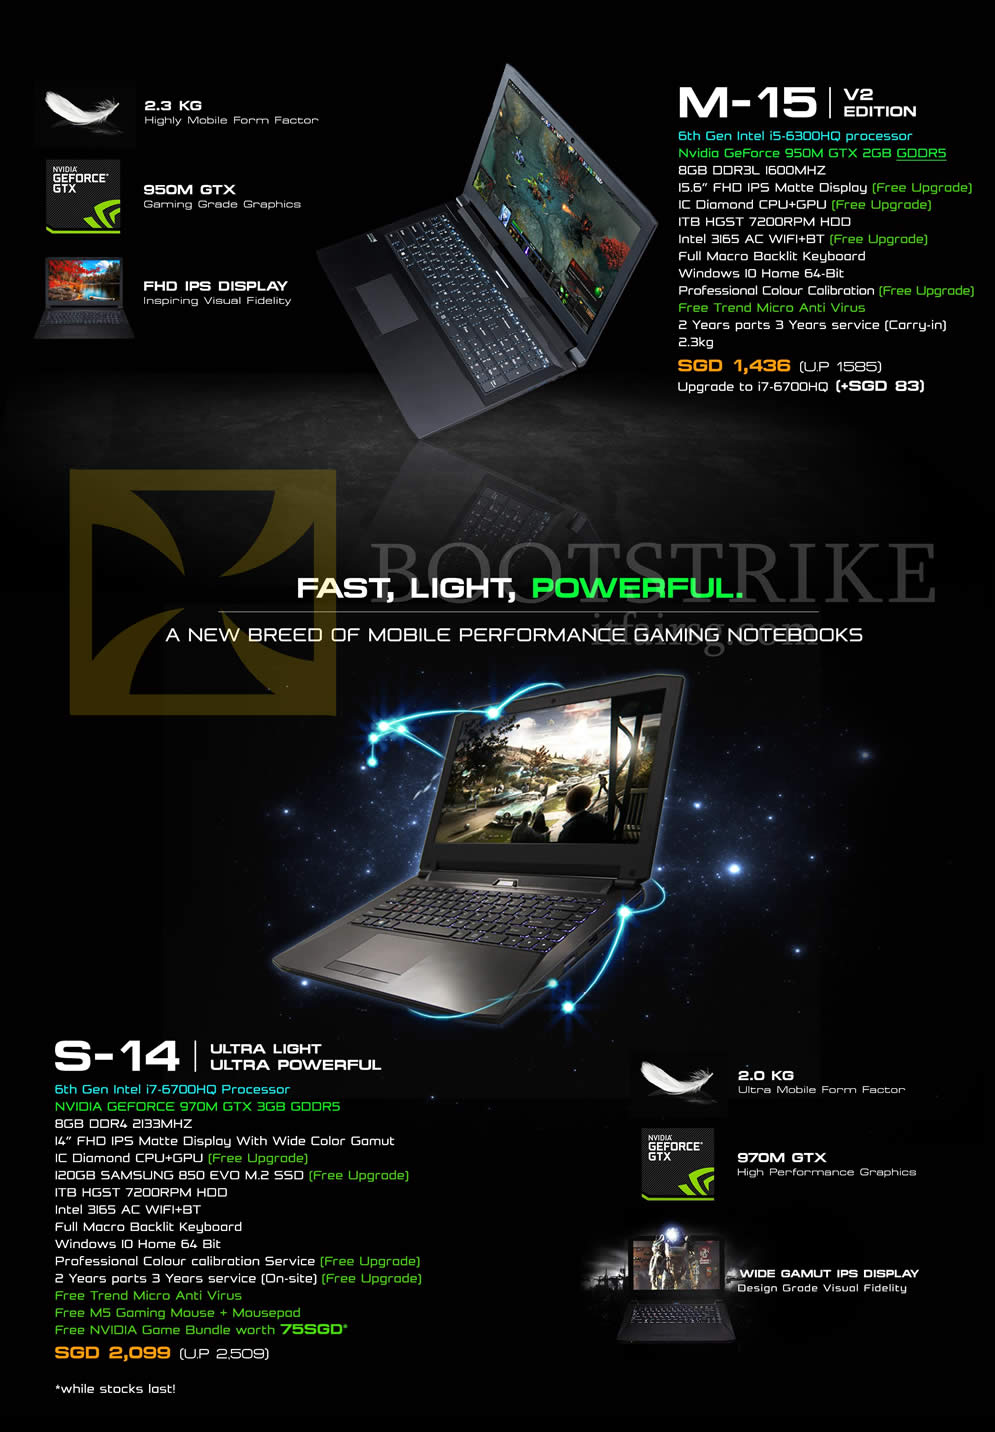 SITEX 2015 price list image brochure of Aftershock Notebooks M-15 V2 Edition, S-14